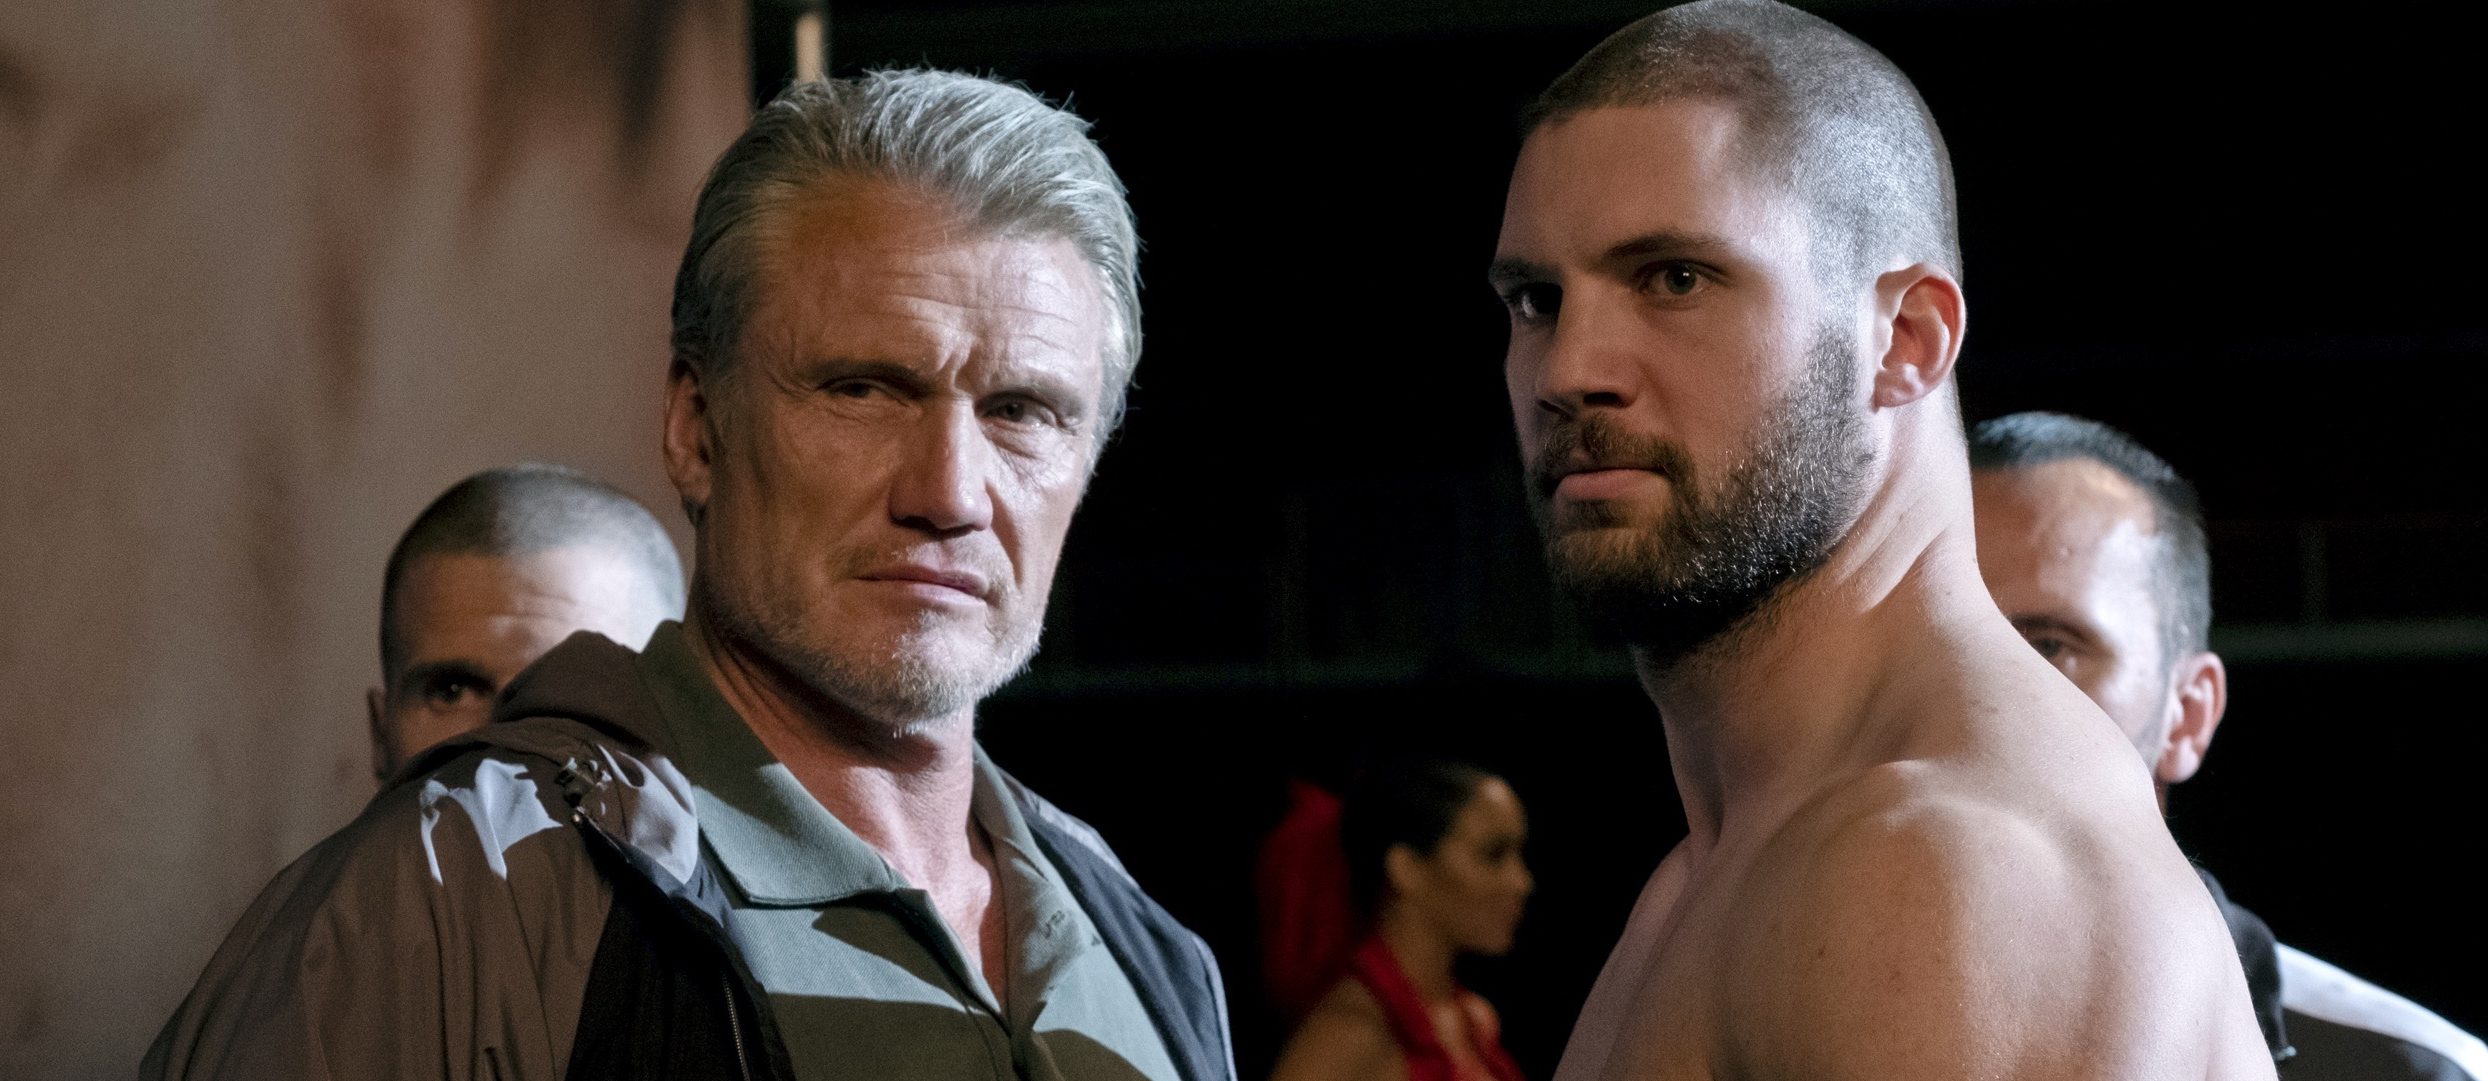 Dolph Lundgren Takes Swing at Changing Audience Perceptions in “Creed II”